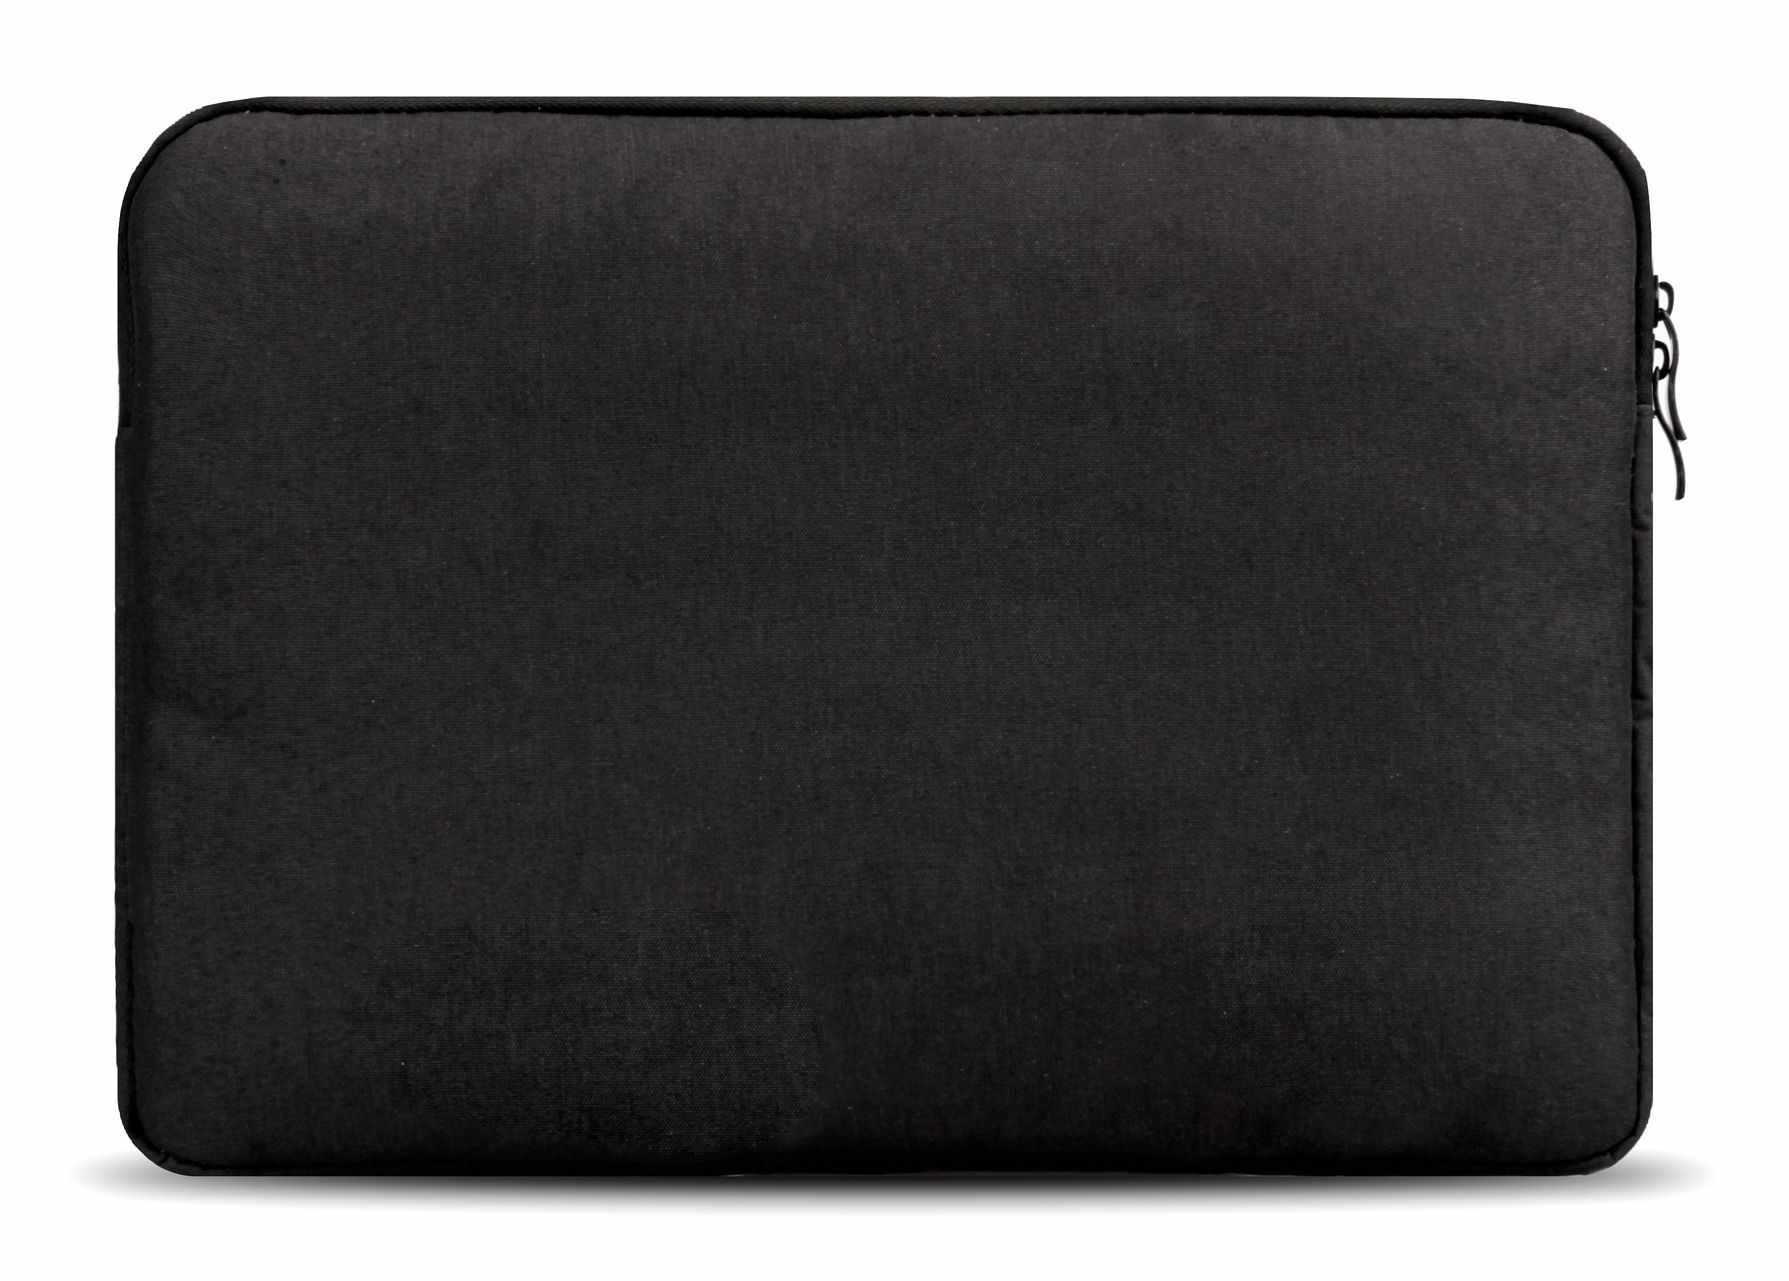 Sleeve Pouch 13" Black for MacBook and Laptop